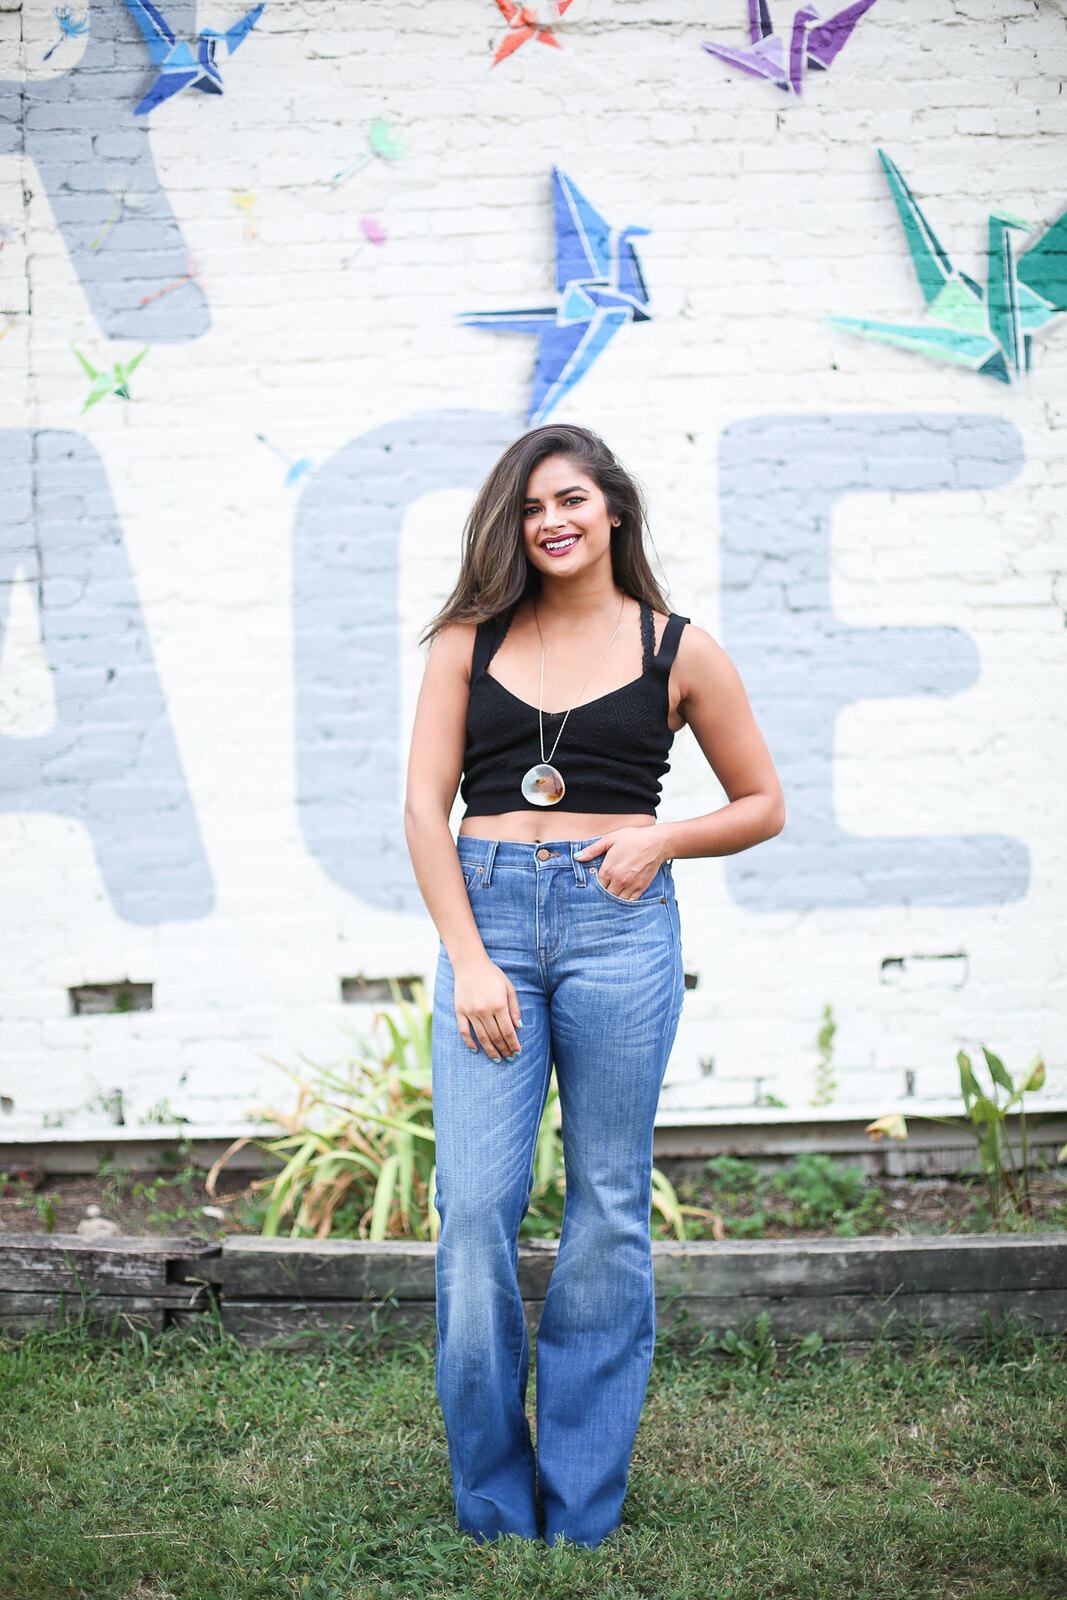 Priya the Blog, Nashville fashion blog, Nashville fashion blogger, Nashville style blog, Nashville style blogger, Nashville mural, Nashville Wish for Peace mural, Summer outfit, Madewell Flea Market Flares, flared jeans, how to wear flared jeans, knit crop top, Zara knit crop top, how to wear a knit crop top, 